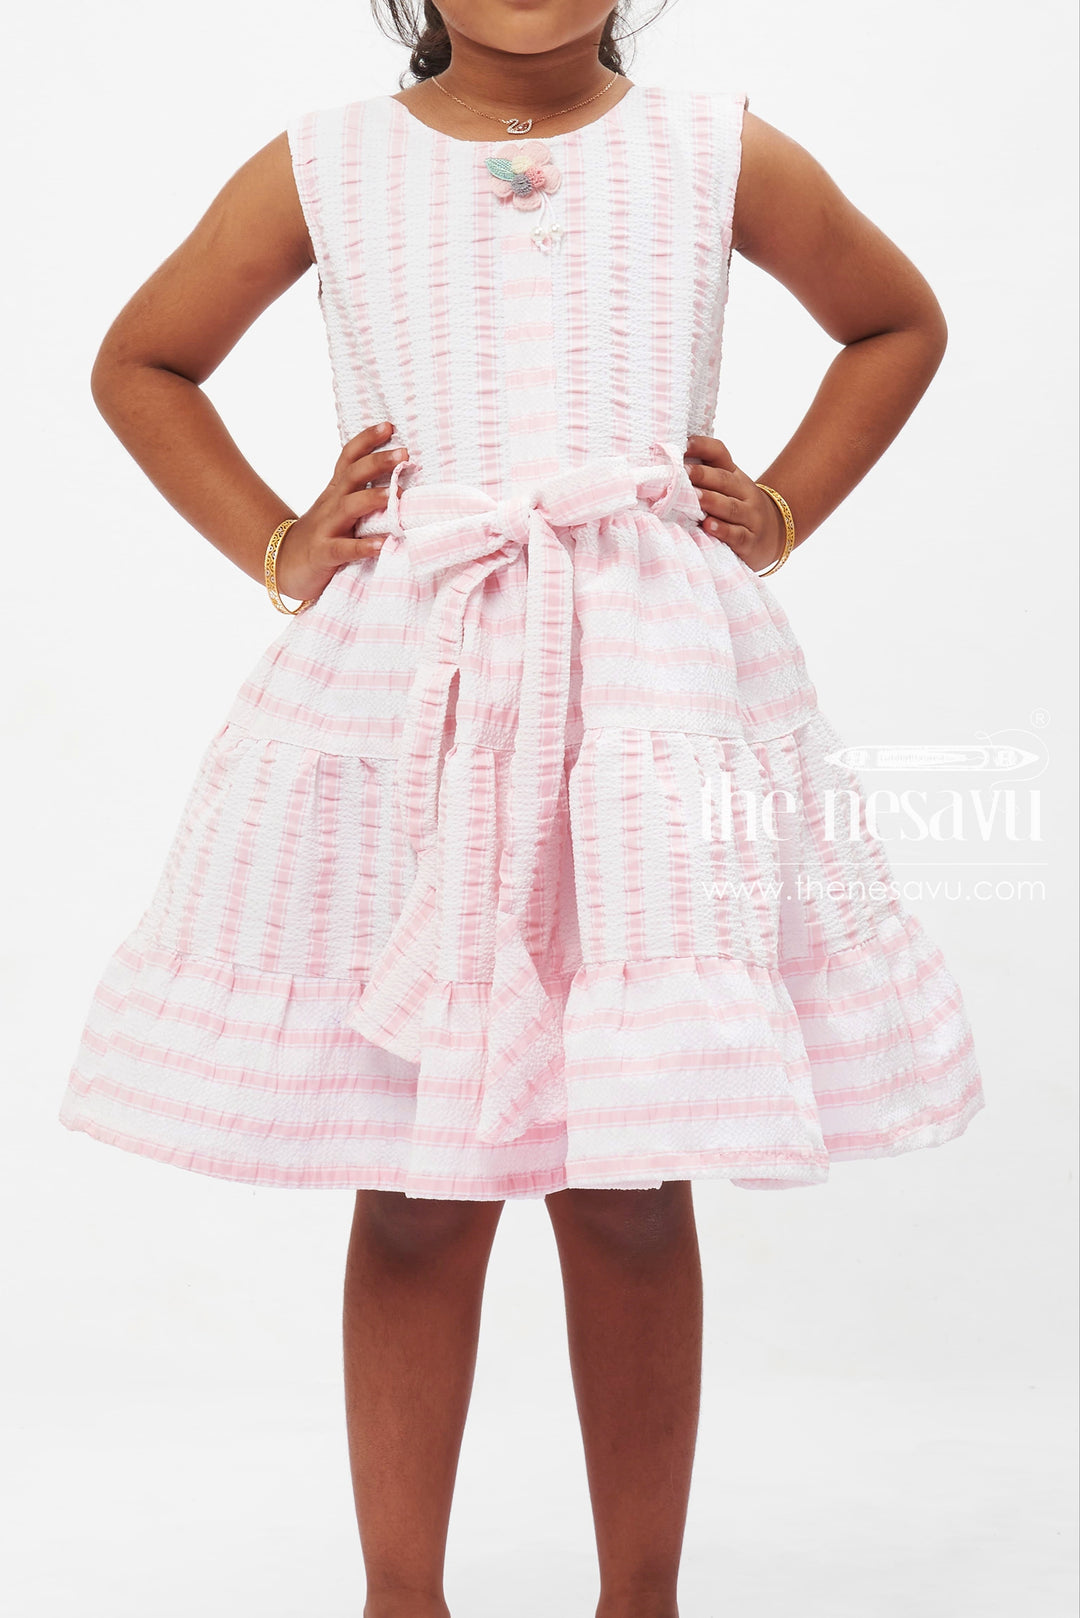 The Nesavu Girls Fancy Frock Candy Stripe Cotton Twirl Frock: Playful Pink with Bow Detail for Girls Nesavu Girls' Pink Stripe Bow Cotton Dress | Sleeveless Summer Frock for Kids | The Nesavu